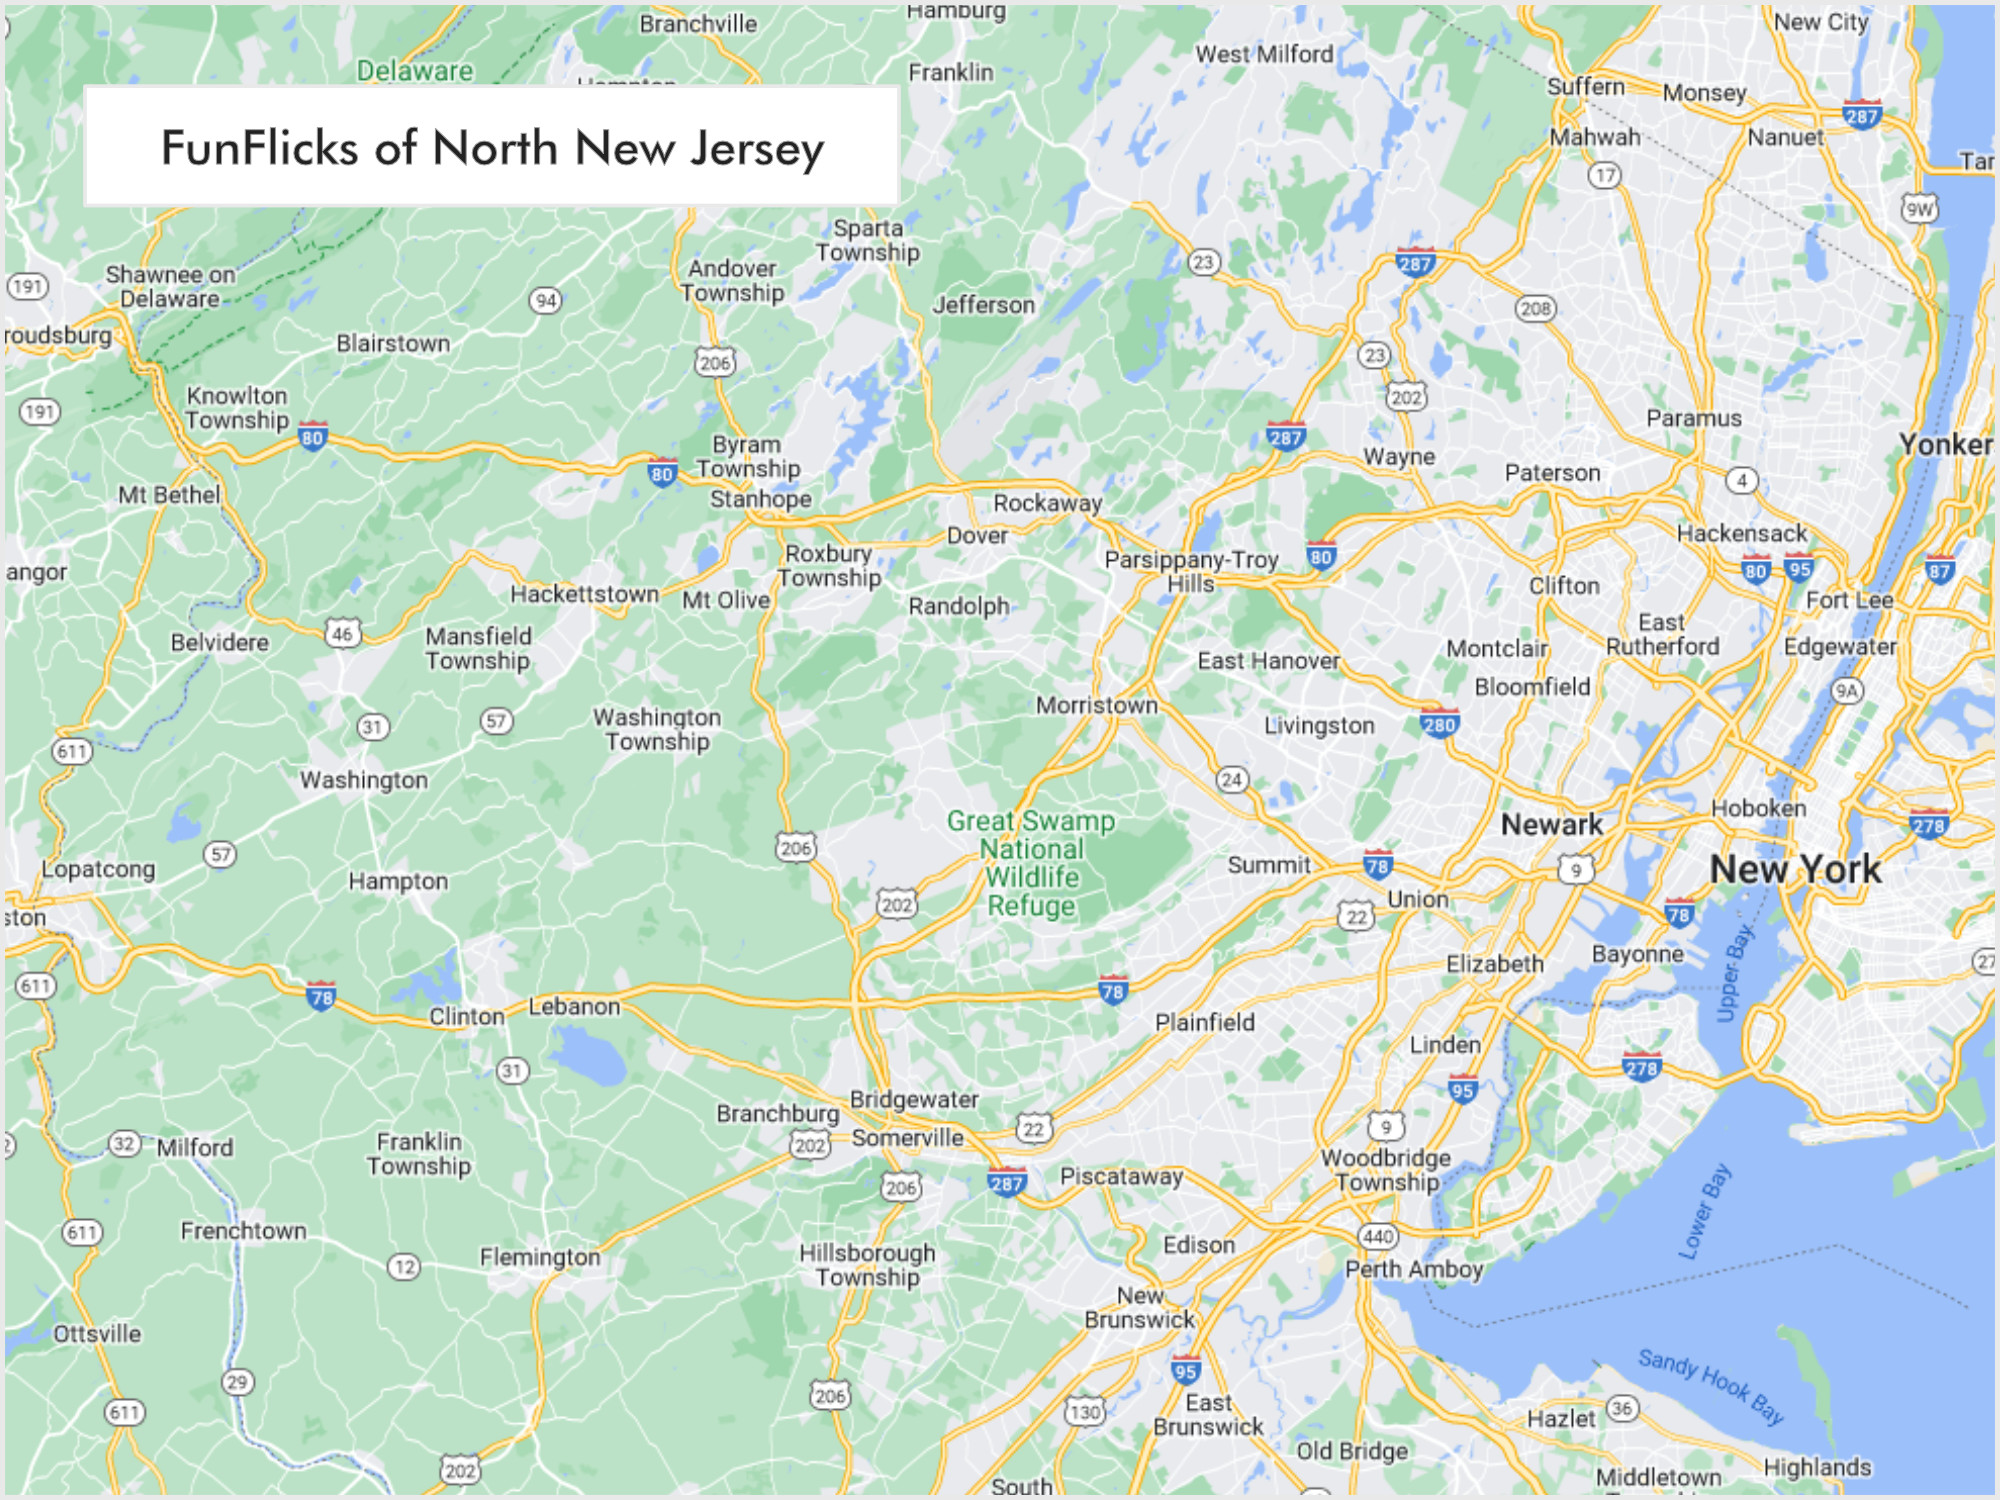 FunFlicks® North Jersey territory map